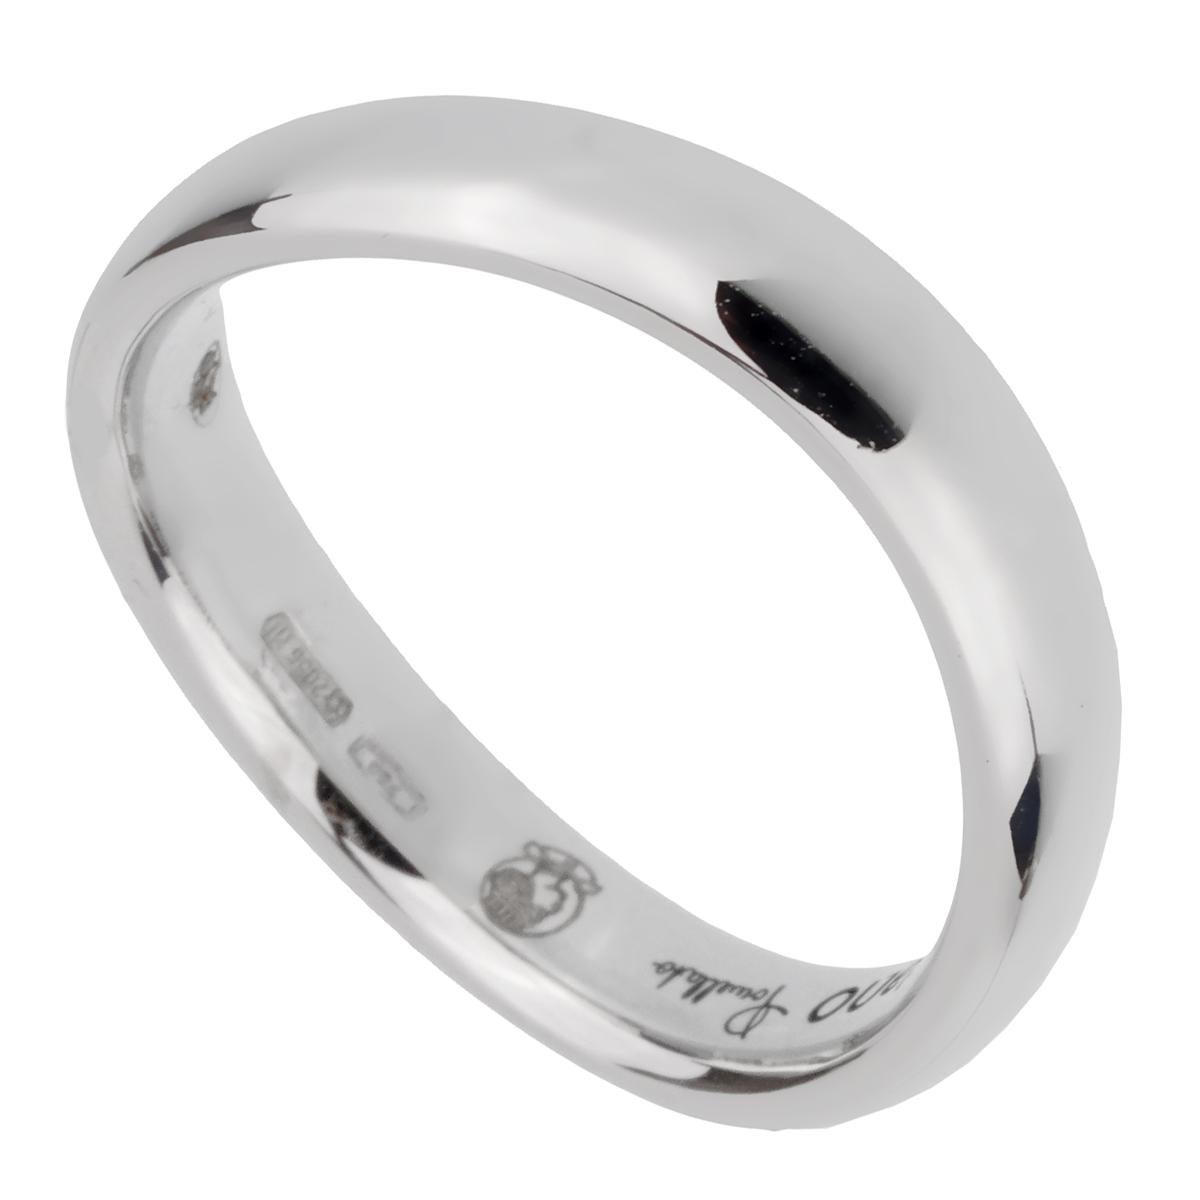 A chic Pomellato wave style band crafted in 18k white gold, the ring measures a size 4.75 and can be resized.

Pomellato Retail Price: $1350
Sku: 2397